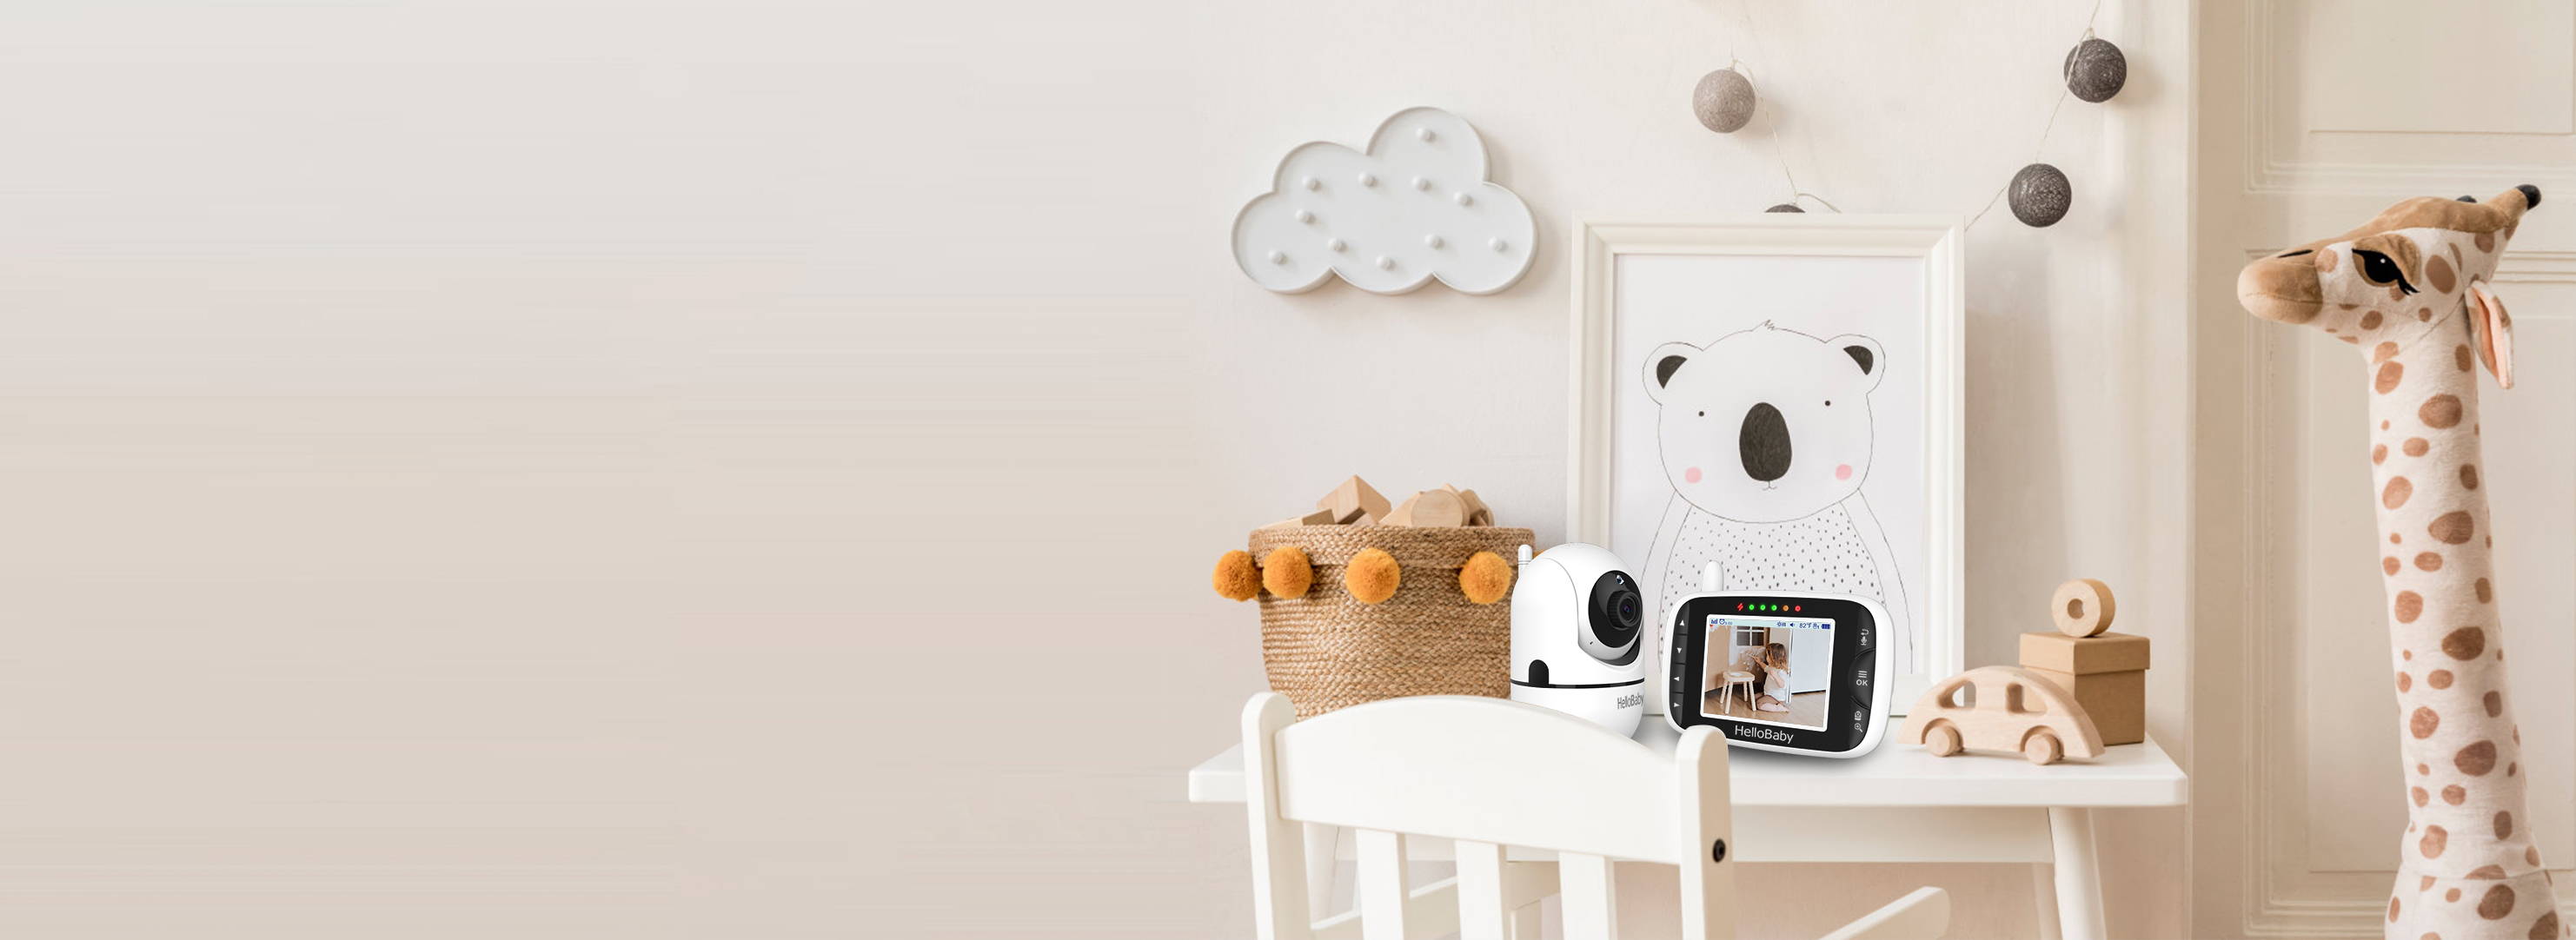 You can find some baby monitor replacement parts (HelloBaby Chargers, HelloBaby Cameras, HelloBaby Monitors) here if you still have baby monitor problems after reset.